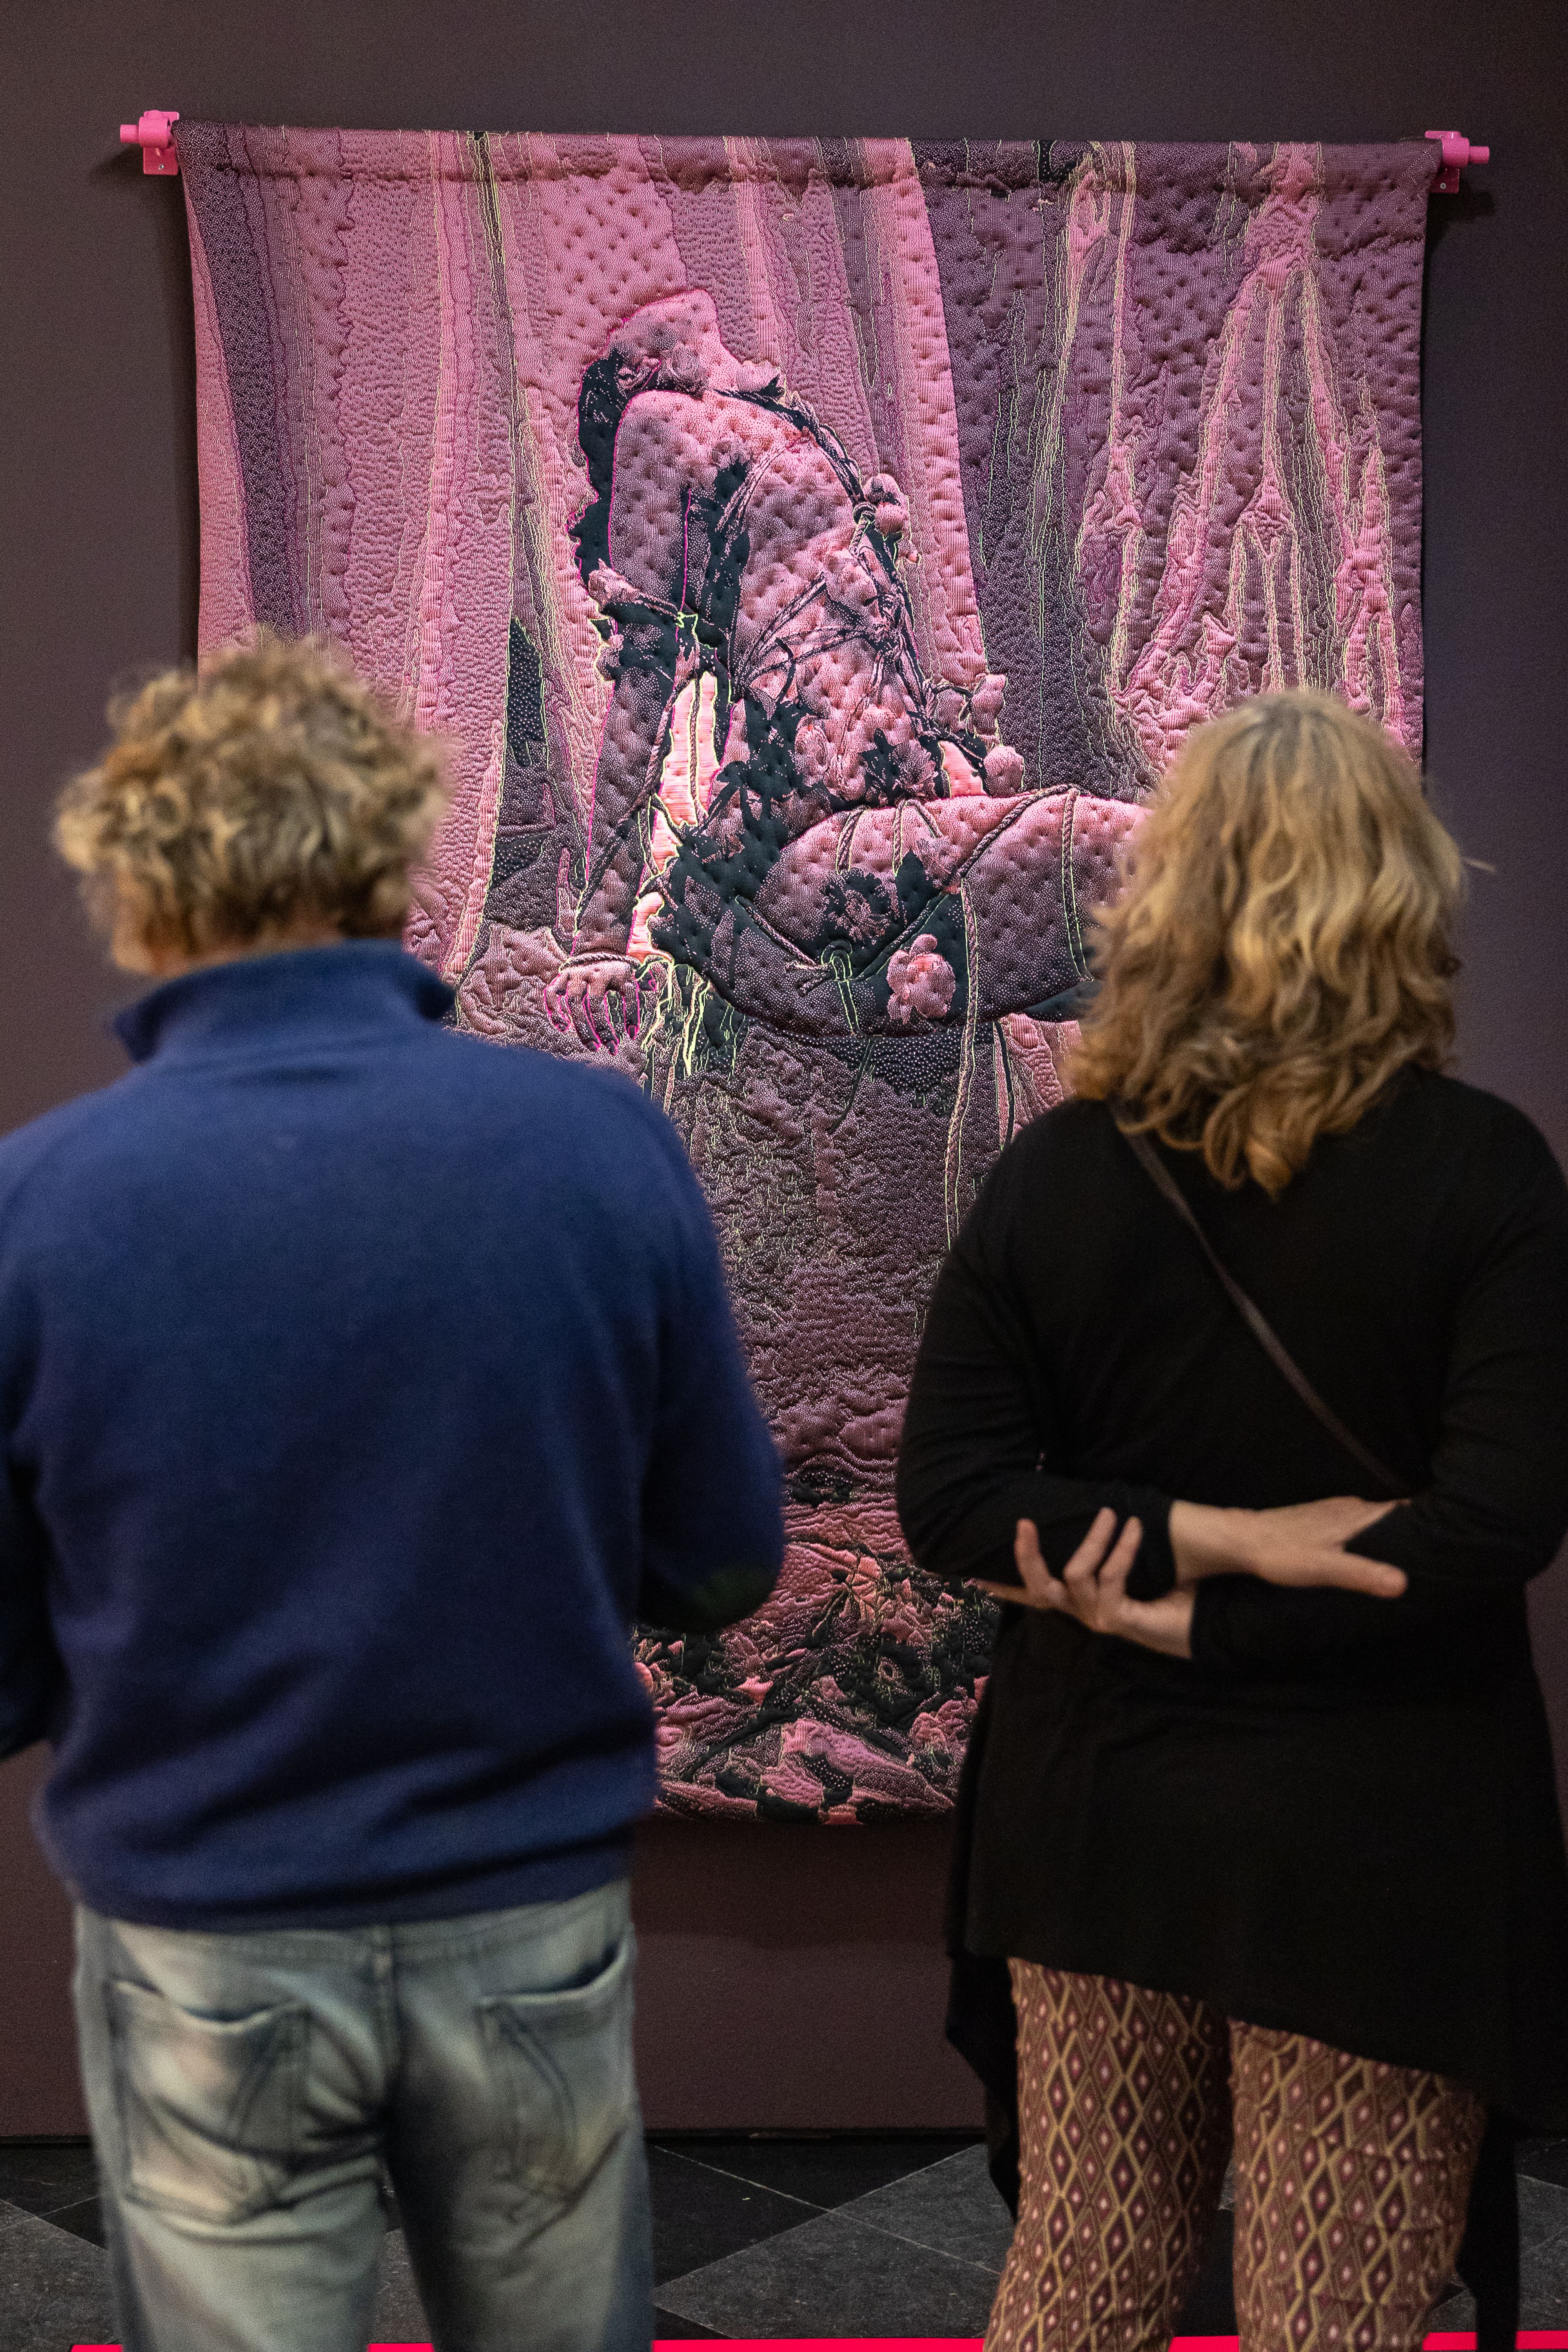 Visitors looking at the work of art by Yamuna Forzani when visiting ‘The Art of Drag’ exhibition at the Frans Hals Museum, Location HAL.